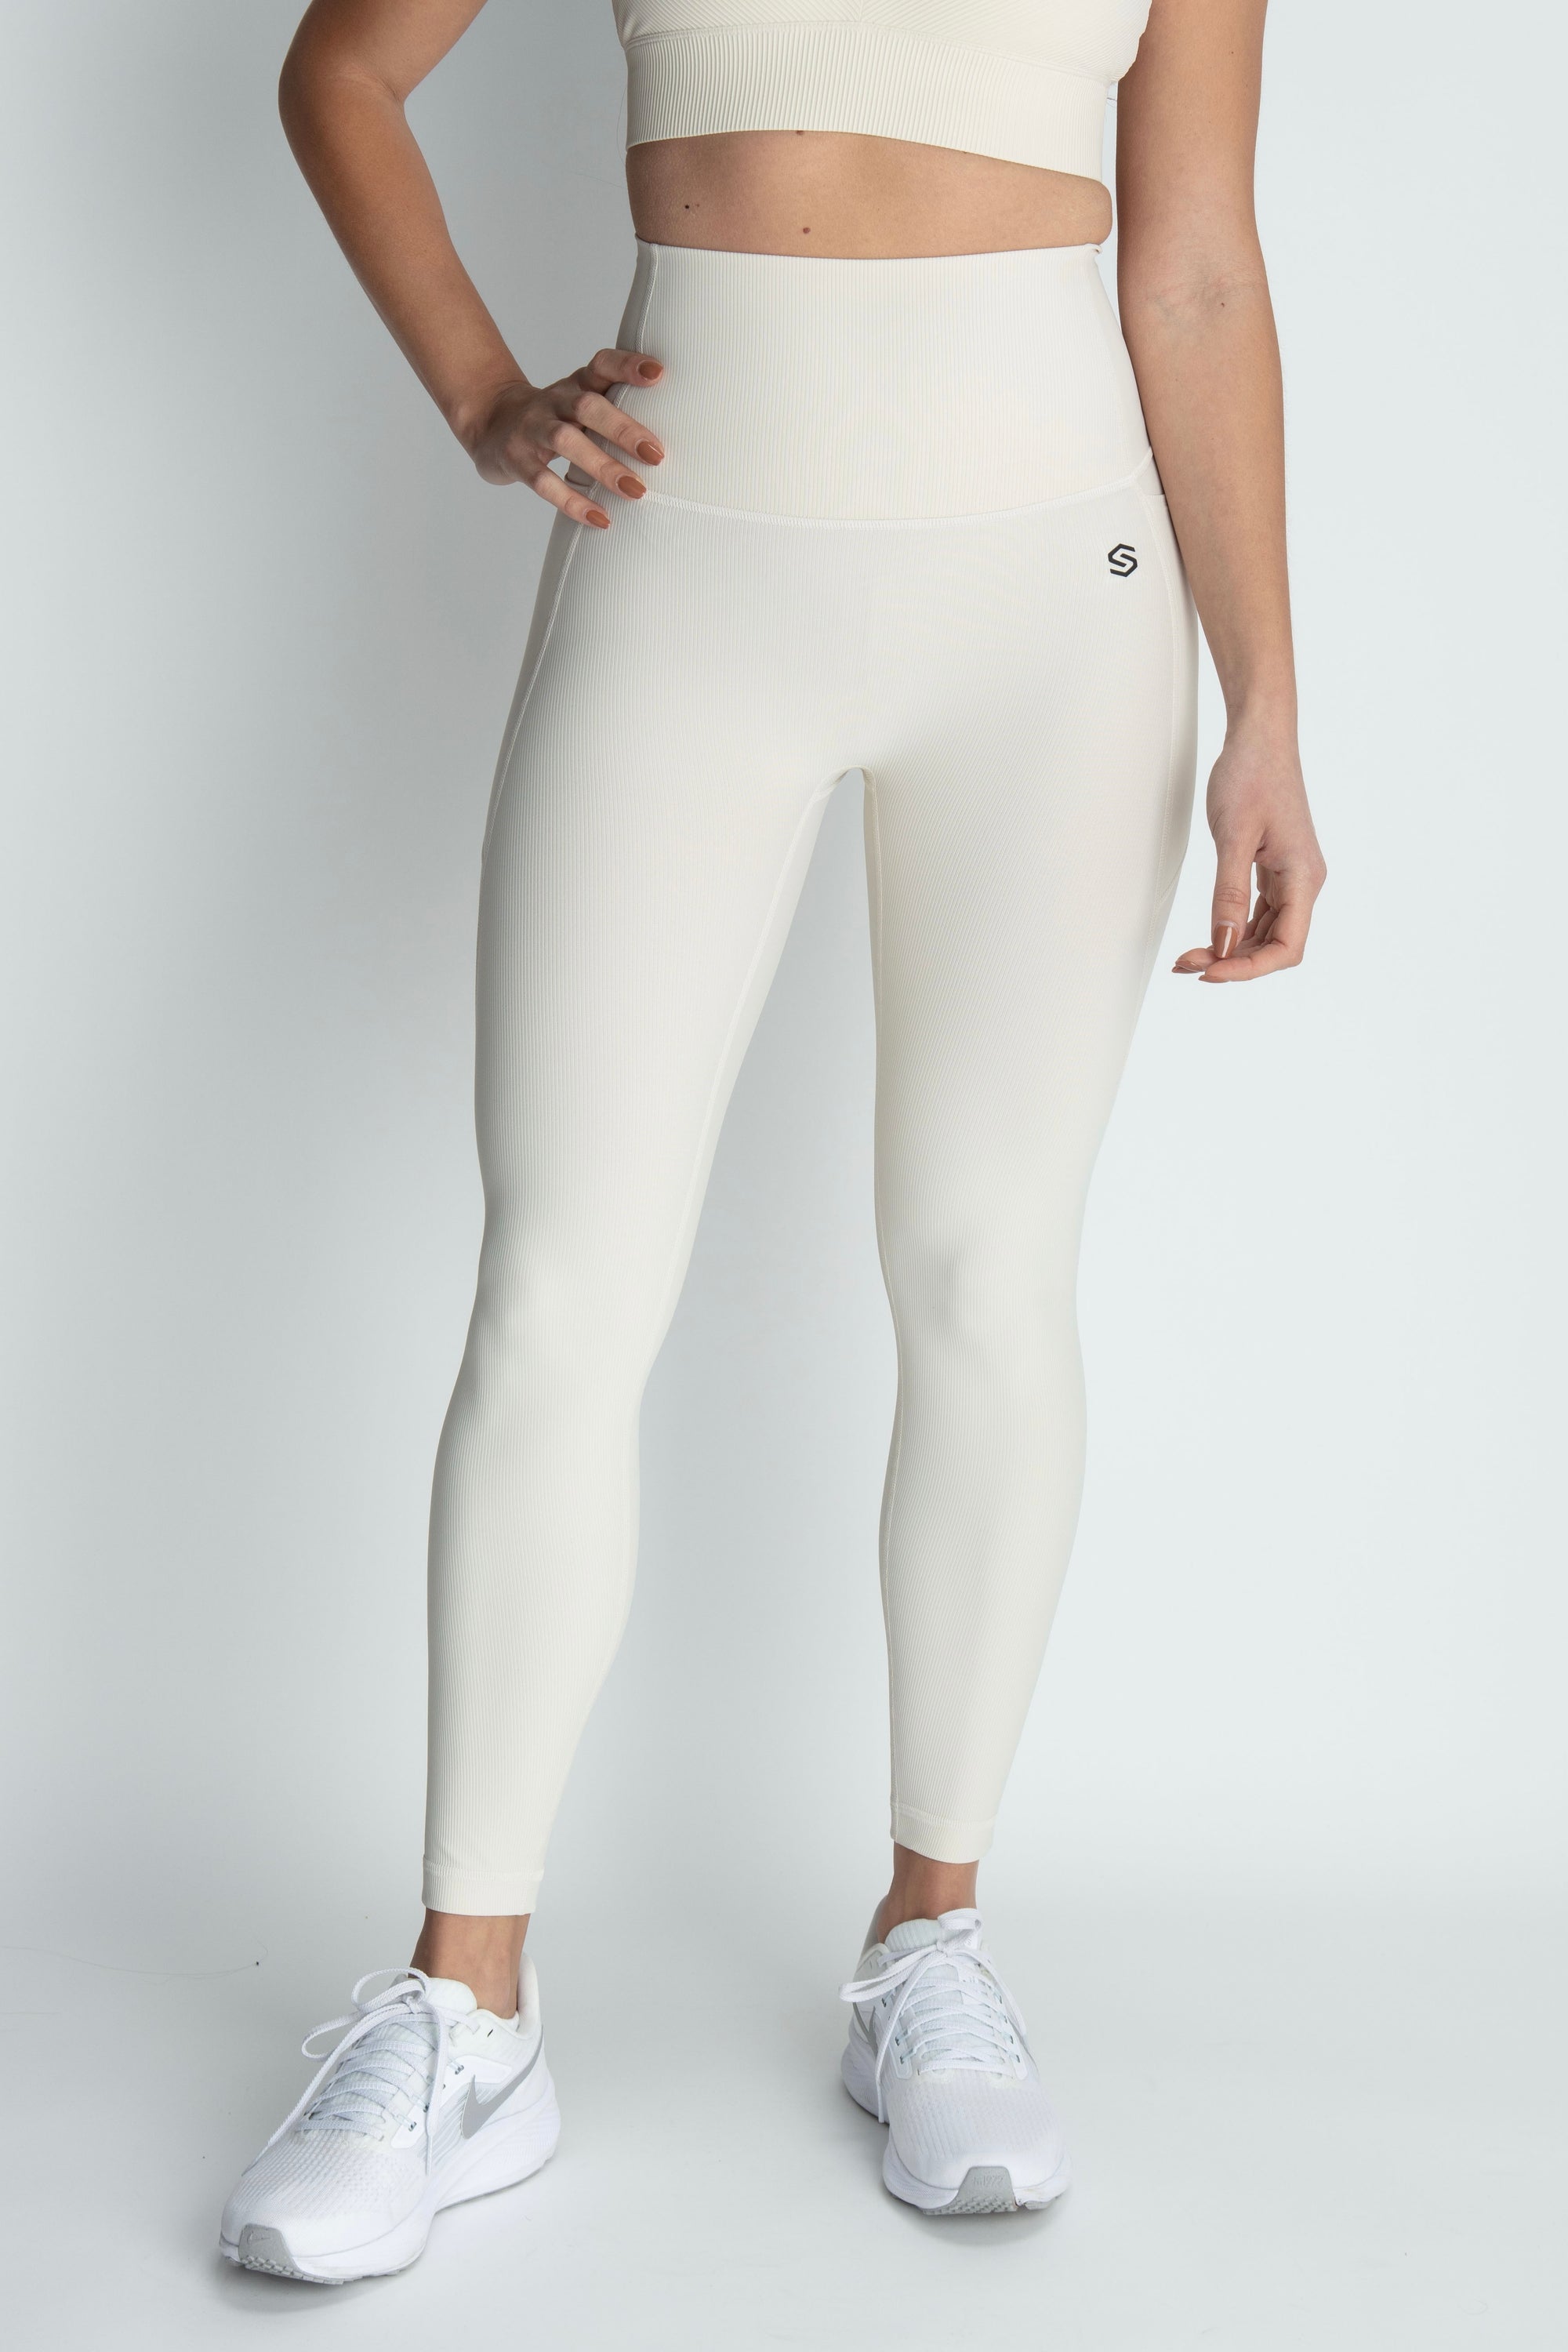 Hand Embroidered Stretch Leggins Yoga Pant White – Lotus Temple Collection